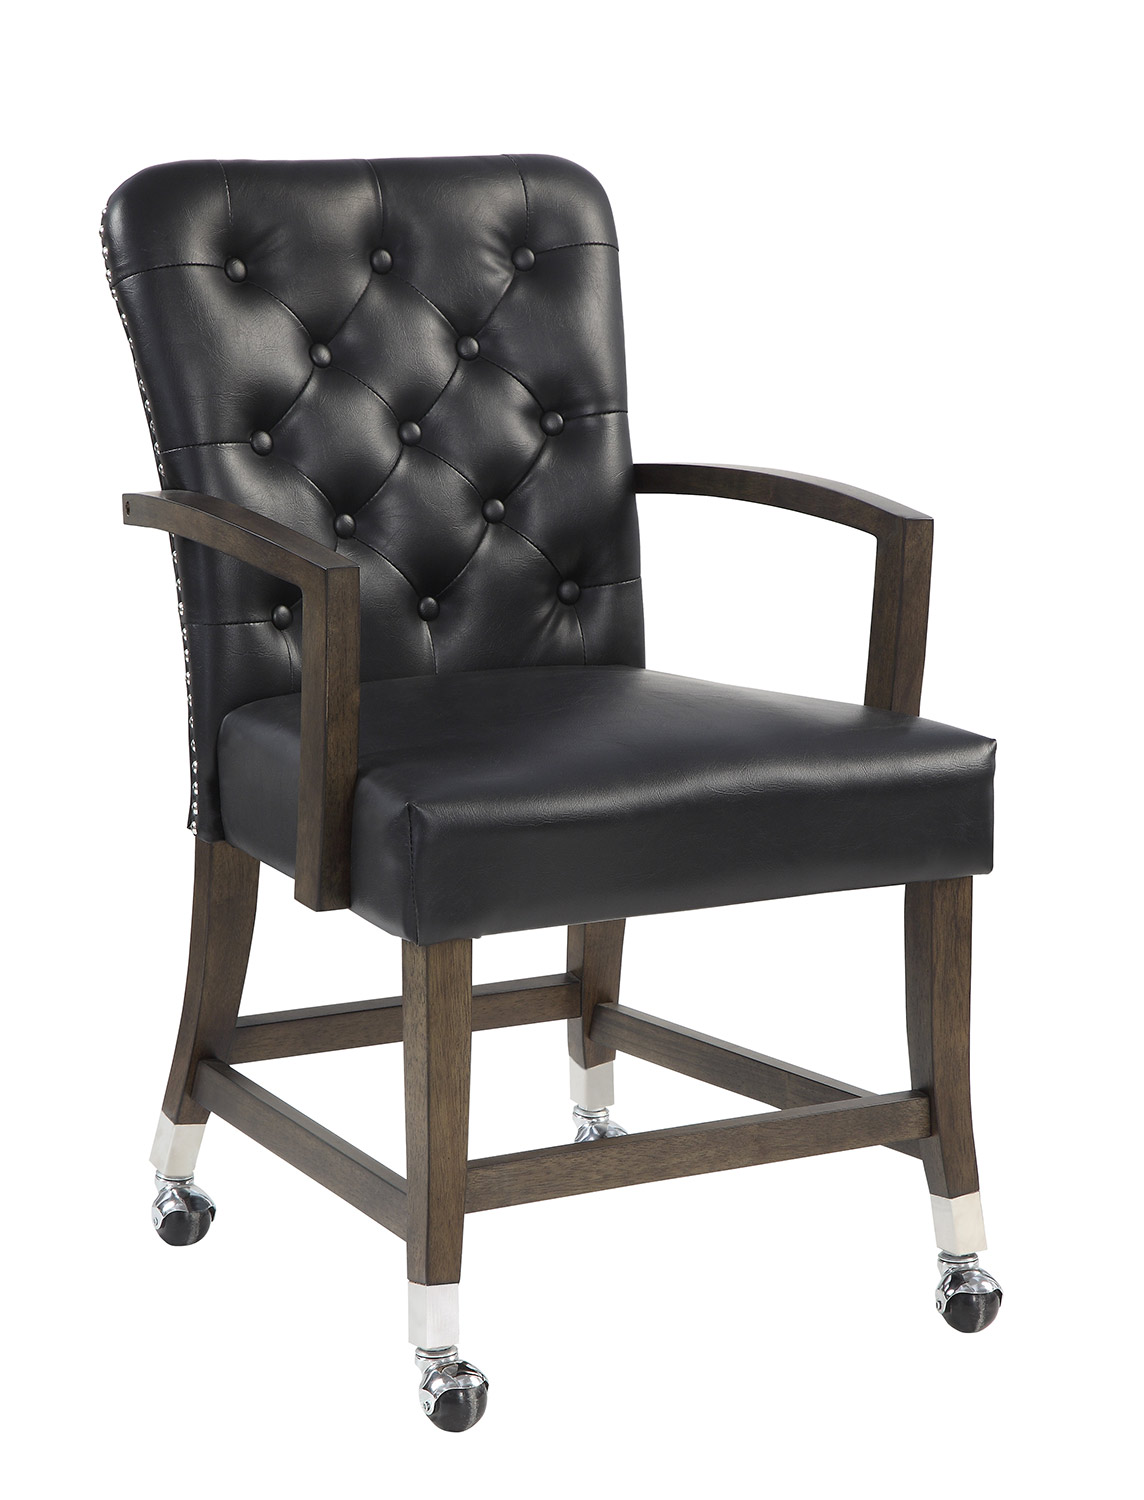 Homelegance Ante Tufted Arm Chair with Casters - Dark Brown